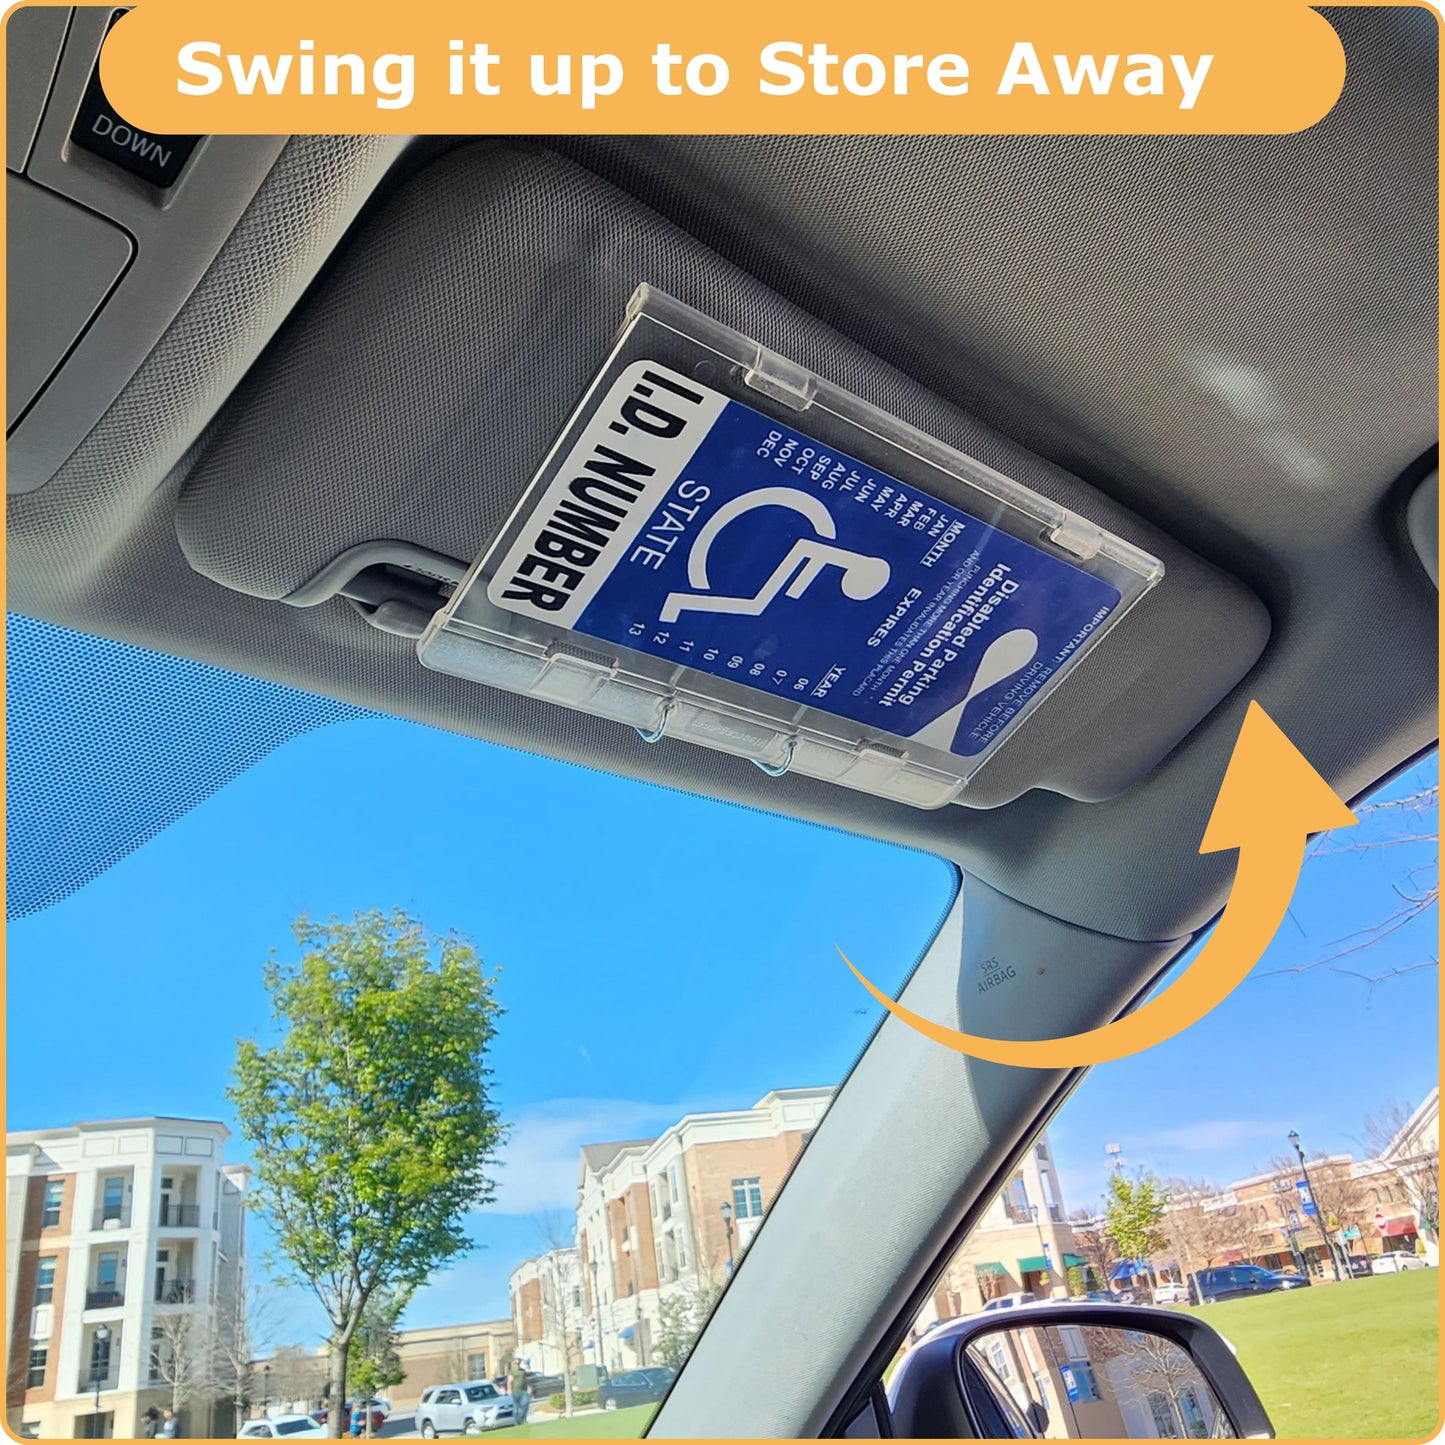 New Visortag® Horizontal by JL Safety® - The Best Handicap Placard Holder on The Market. Easily Protect, Display & Swing Away Your Disabled Parking Tag. Hard Plastic to Withstand 3-Digit Hot Sun. Made in USA